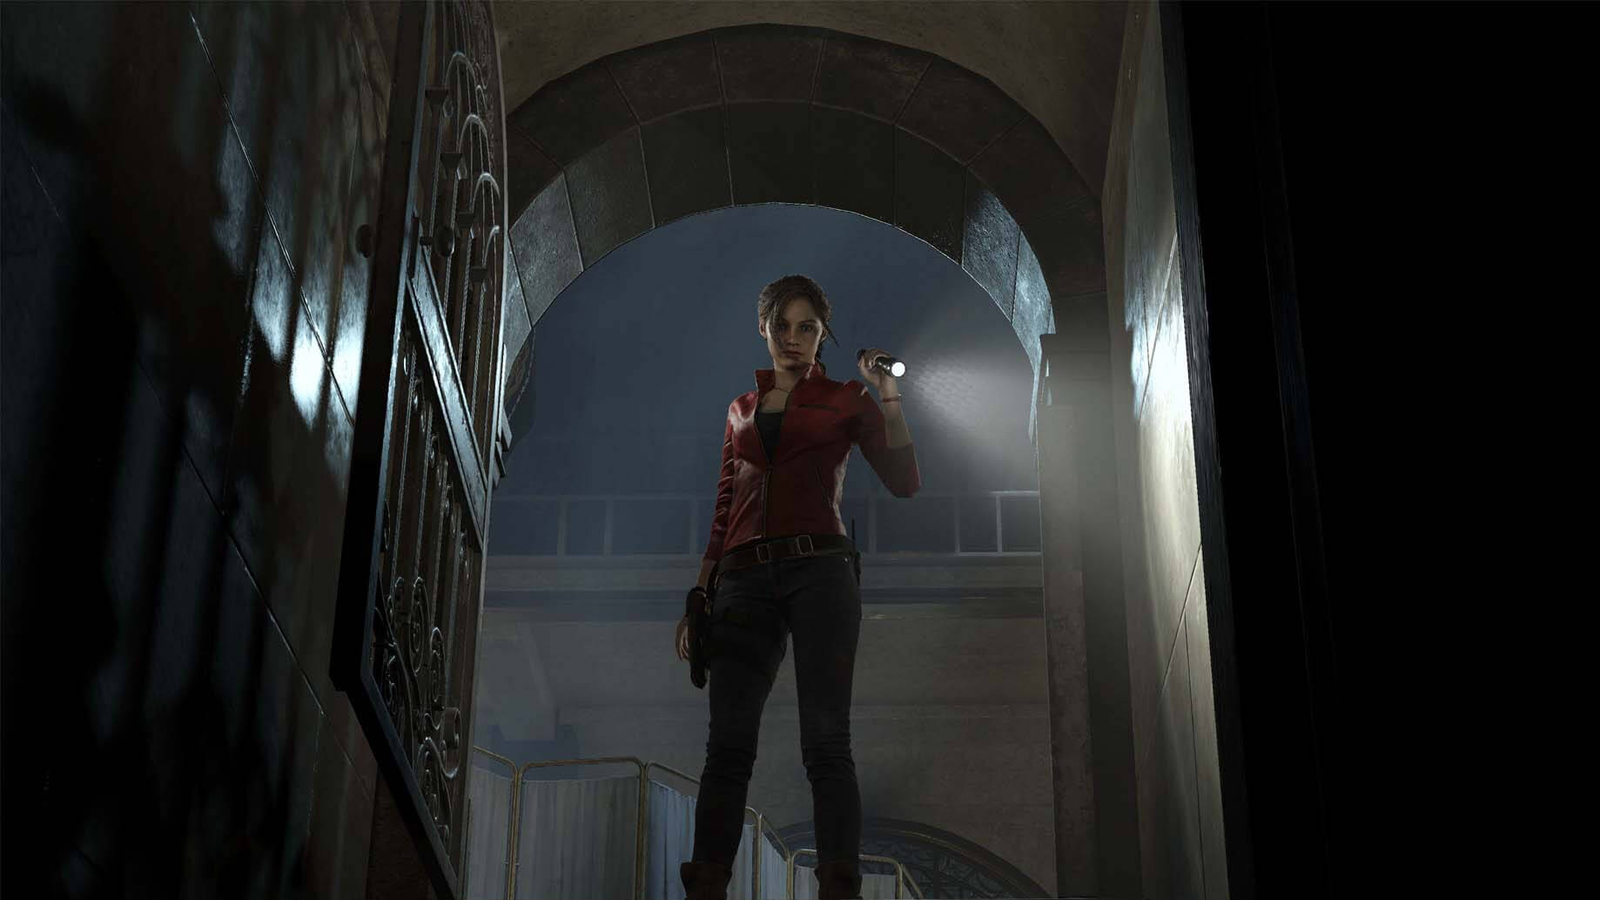 Resident Evil 2 Remake Reveals a Live-Action Trailer, Paying